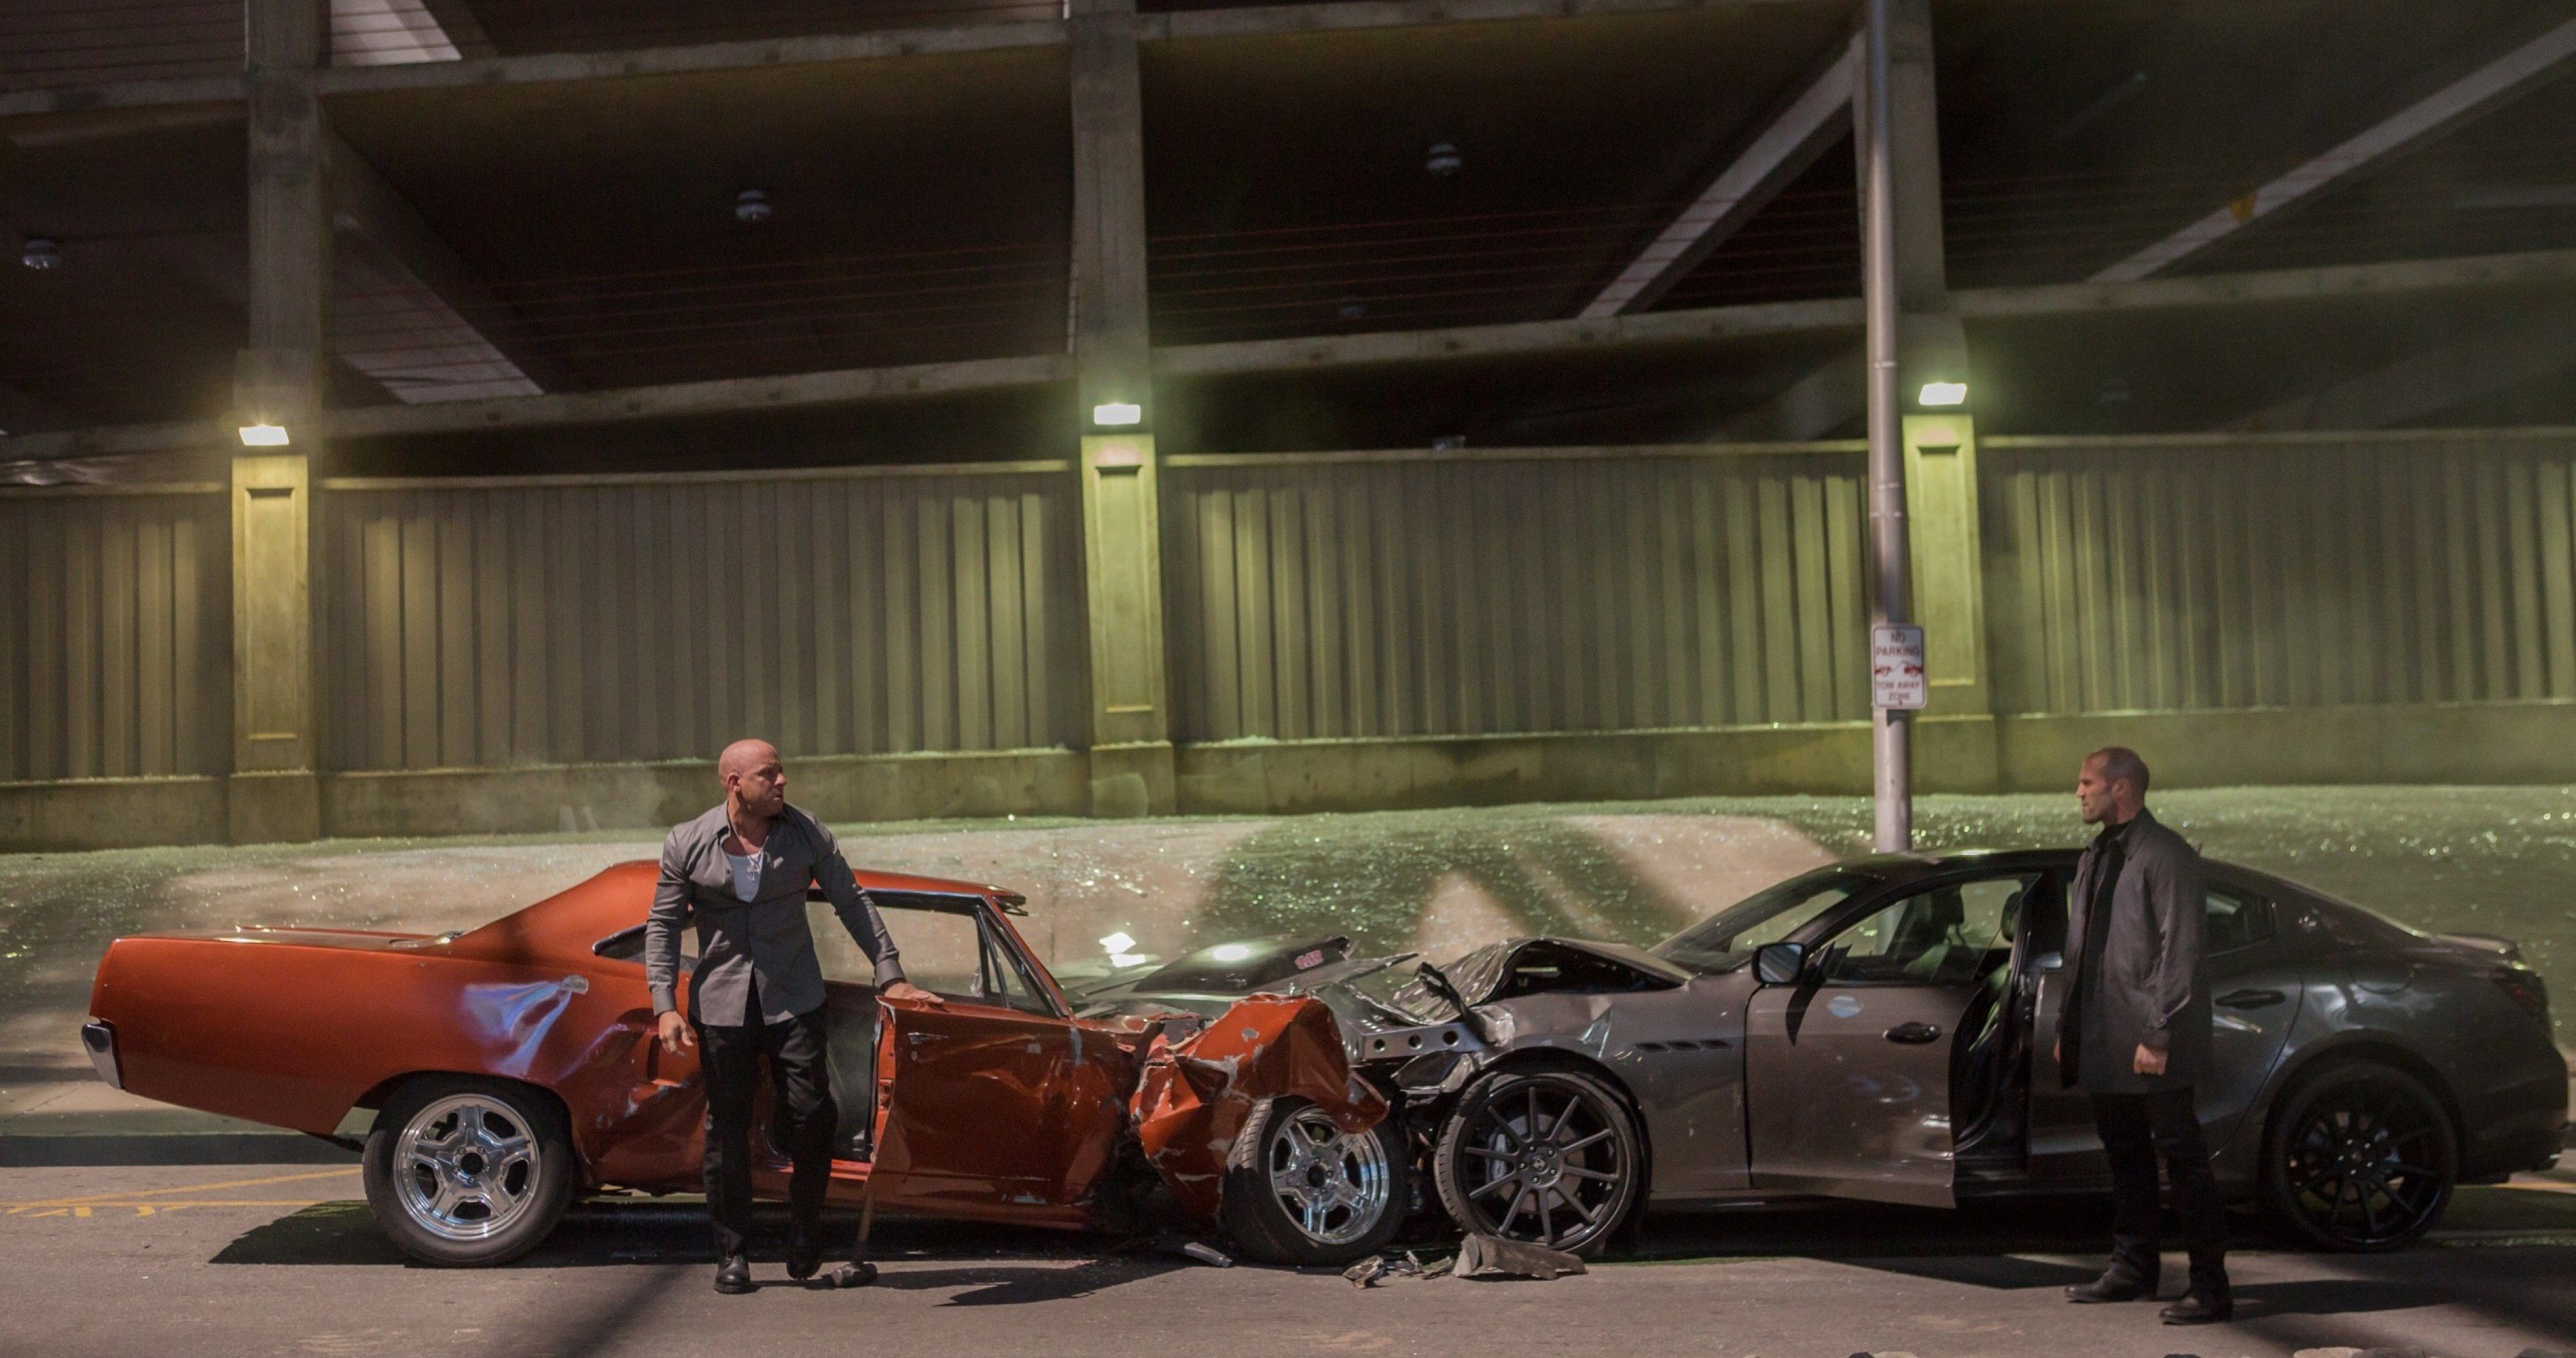 fast and furious 7 accident 4k ultra HD wallpaper. Fast and furious, Vin diesel, Car